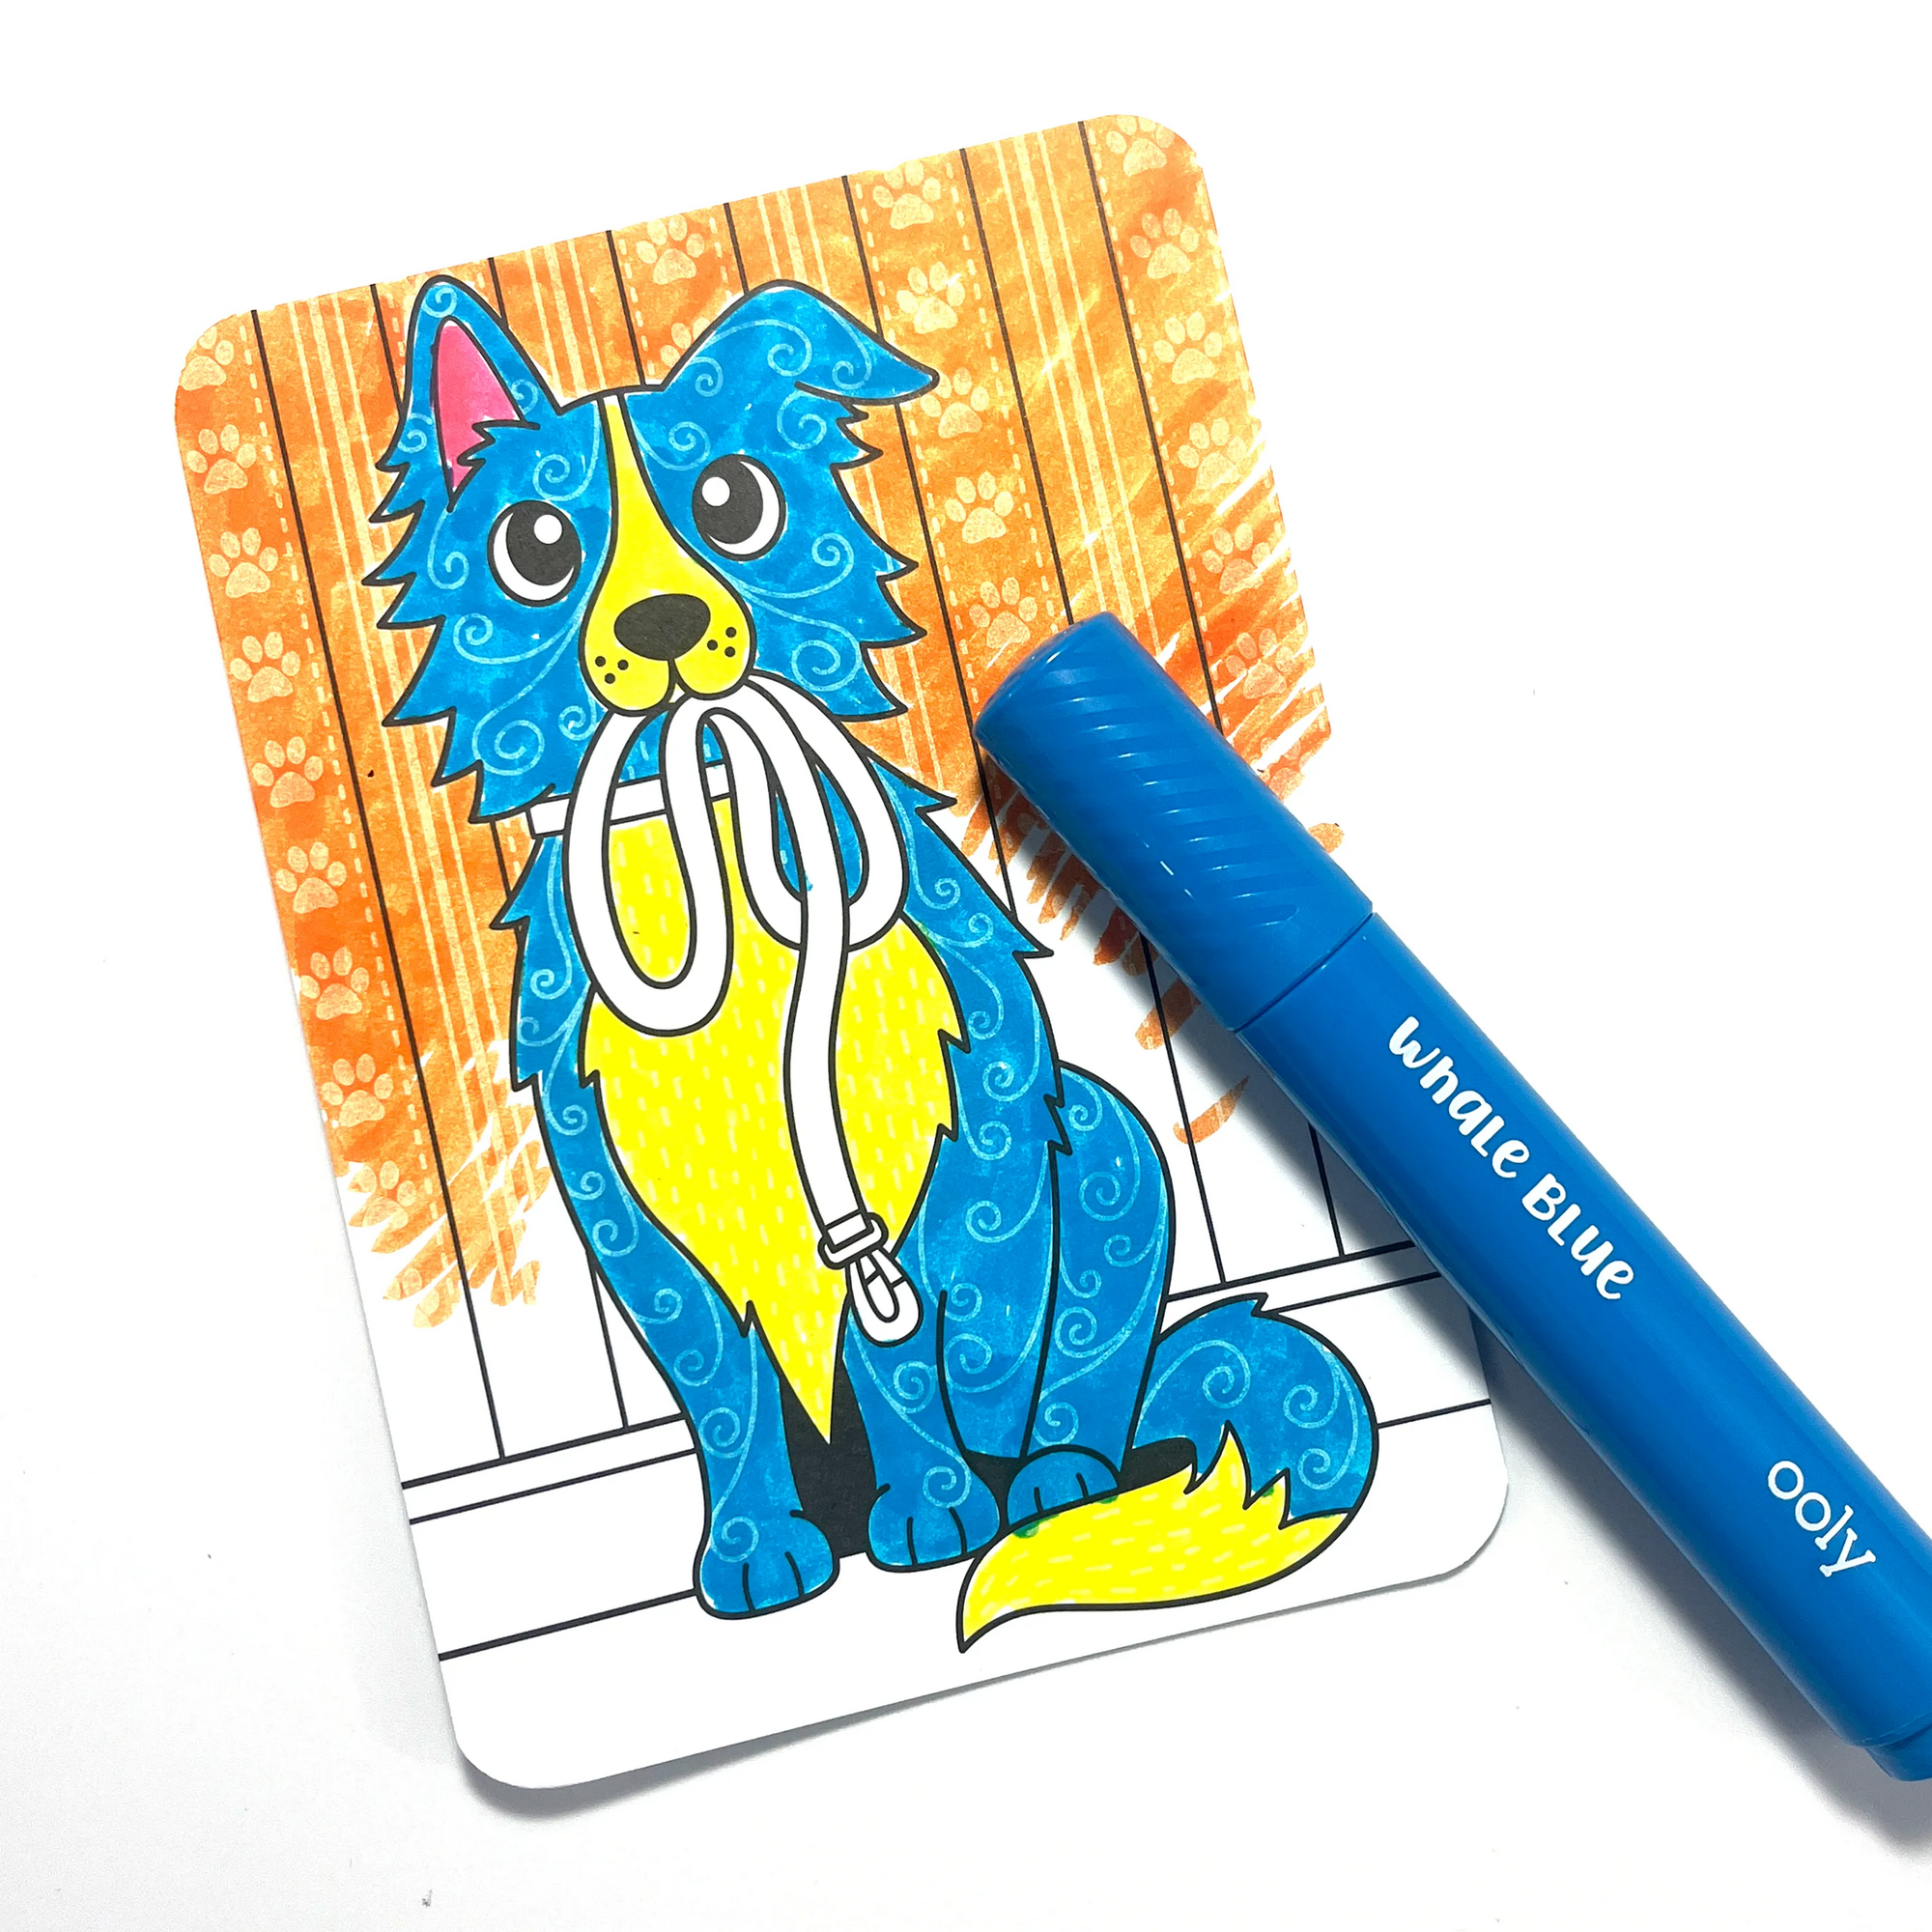 Colored Undercover Art Hidden Pattern Coloring Activity Art Cards - Dog Days with blue marker